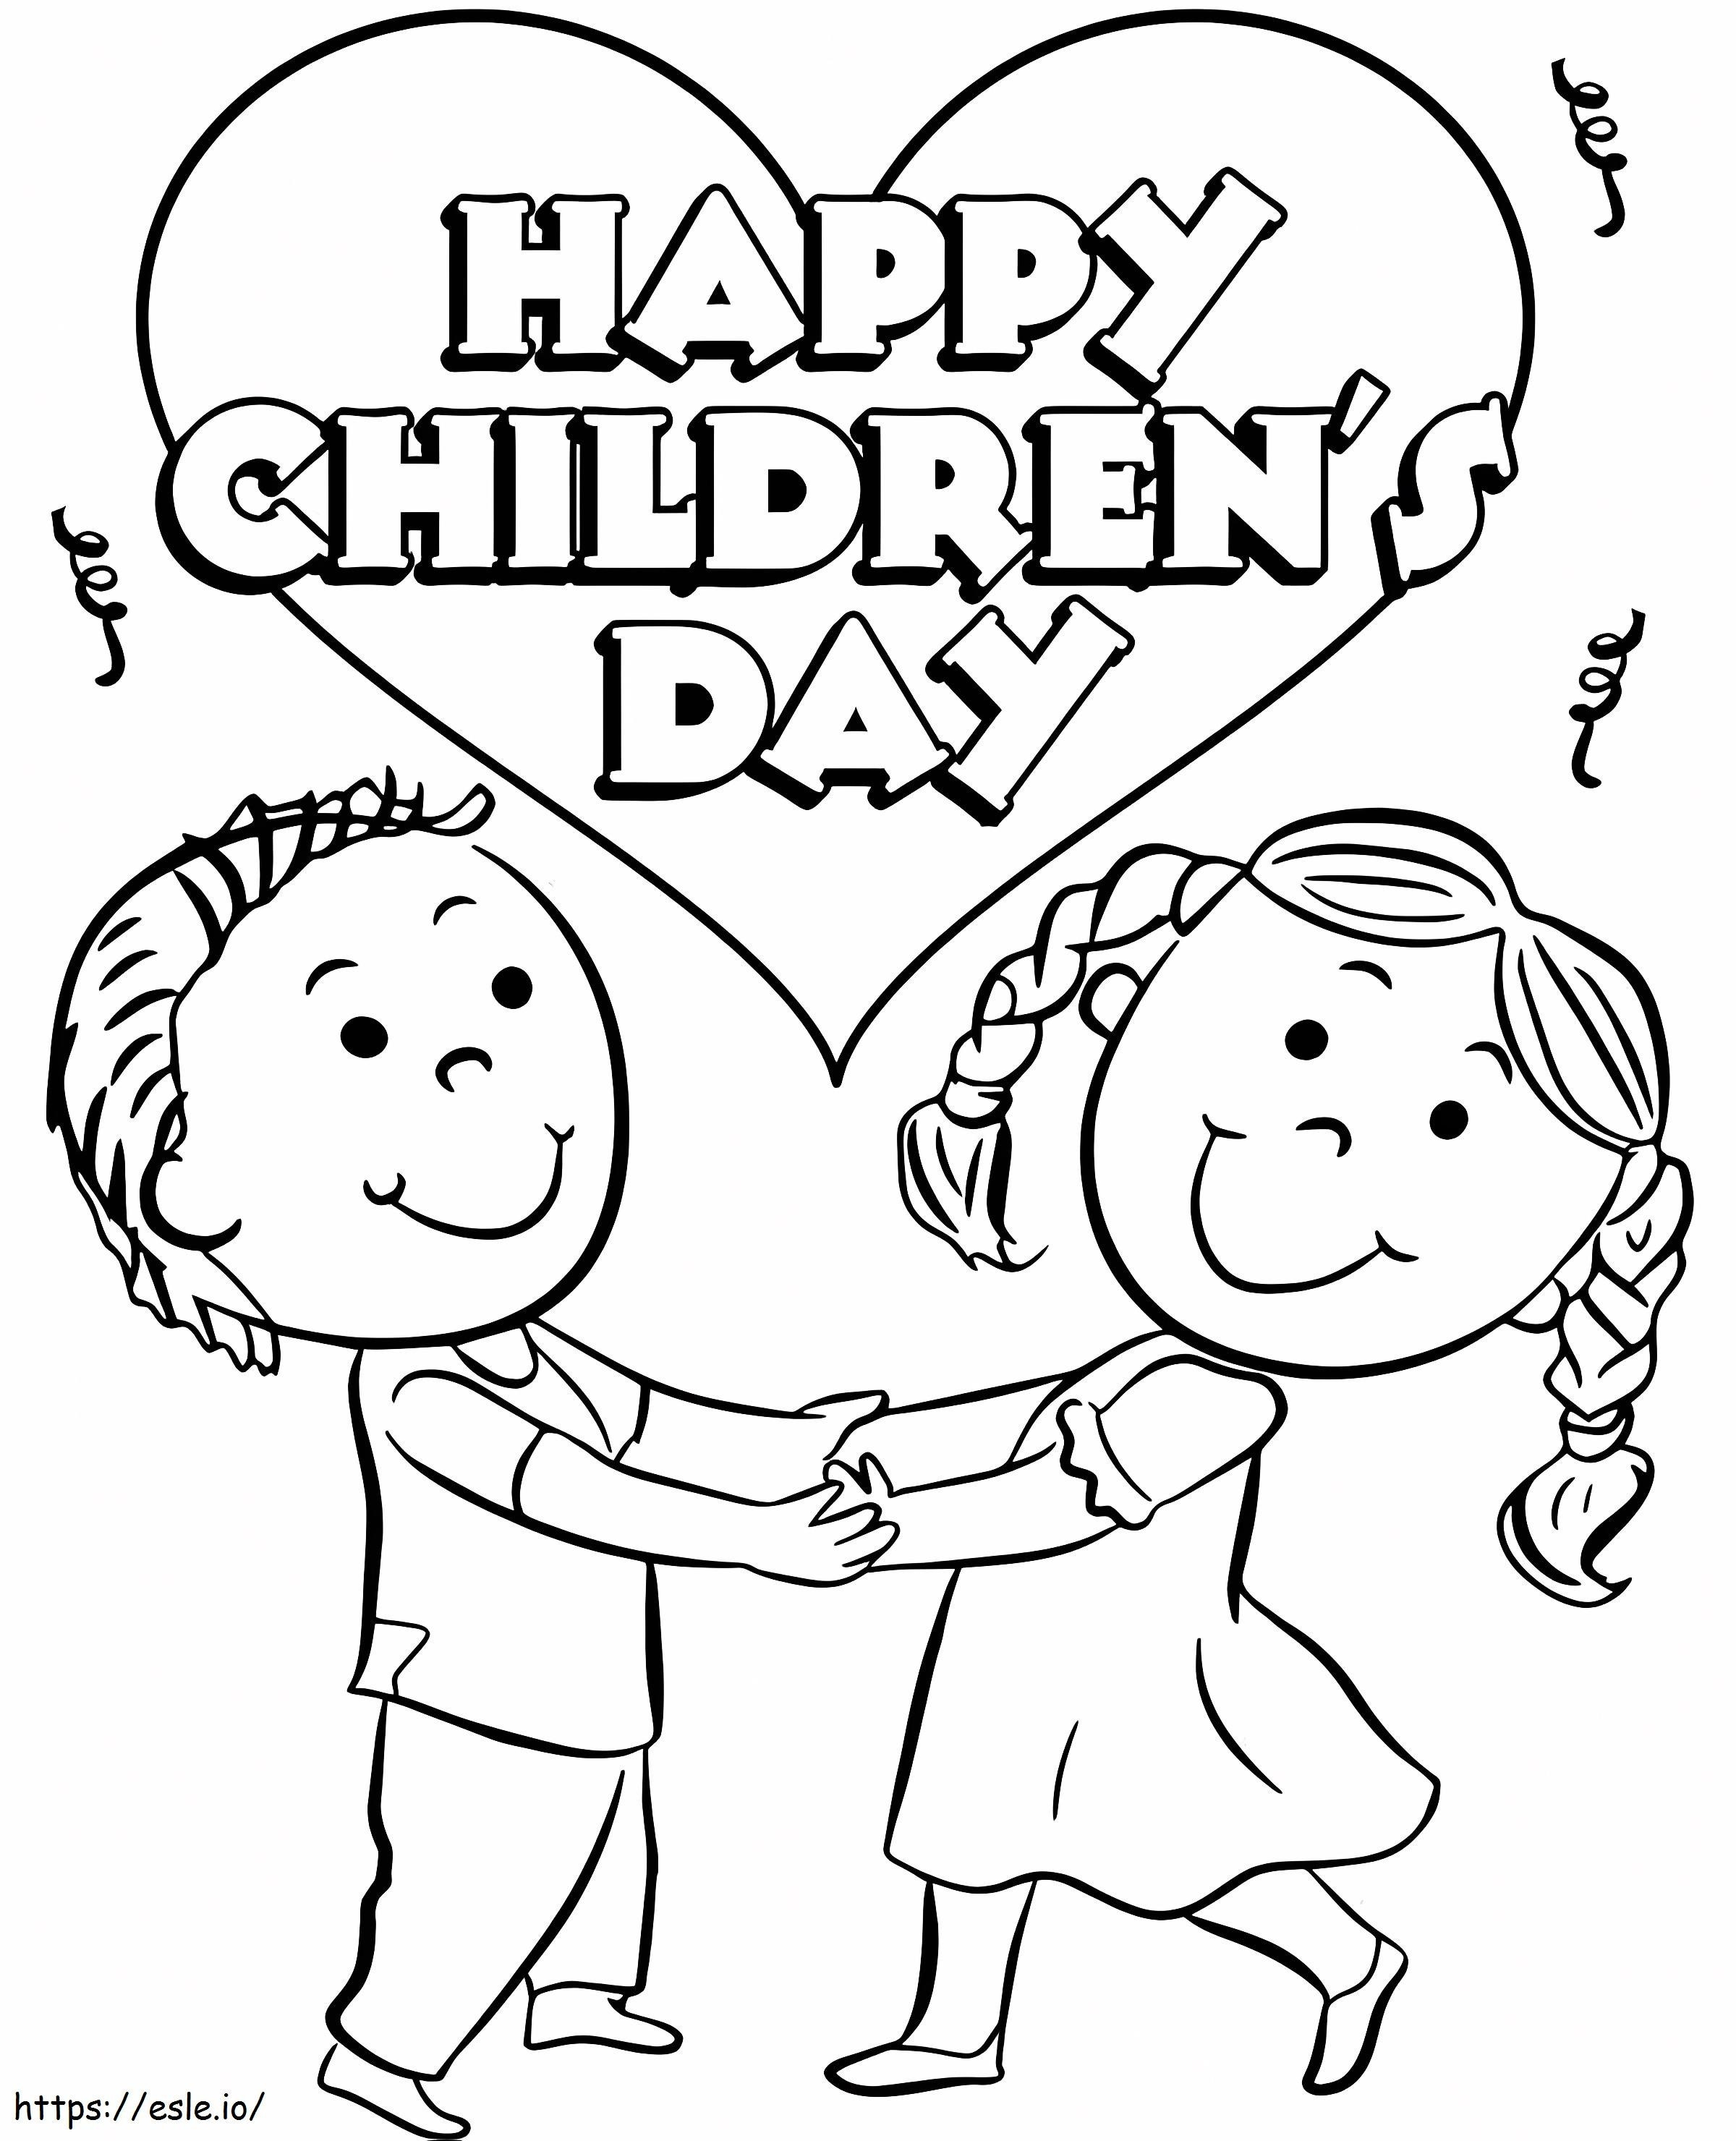 Childrens Day 3 coloring page